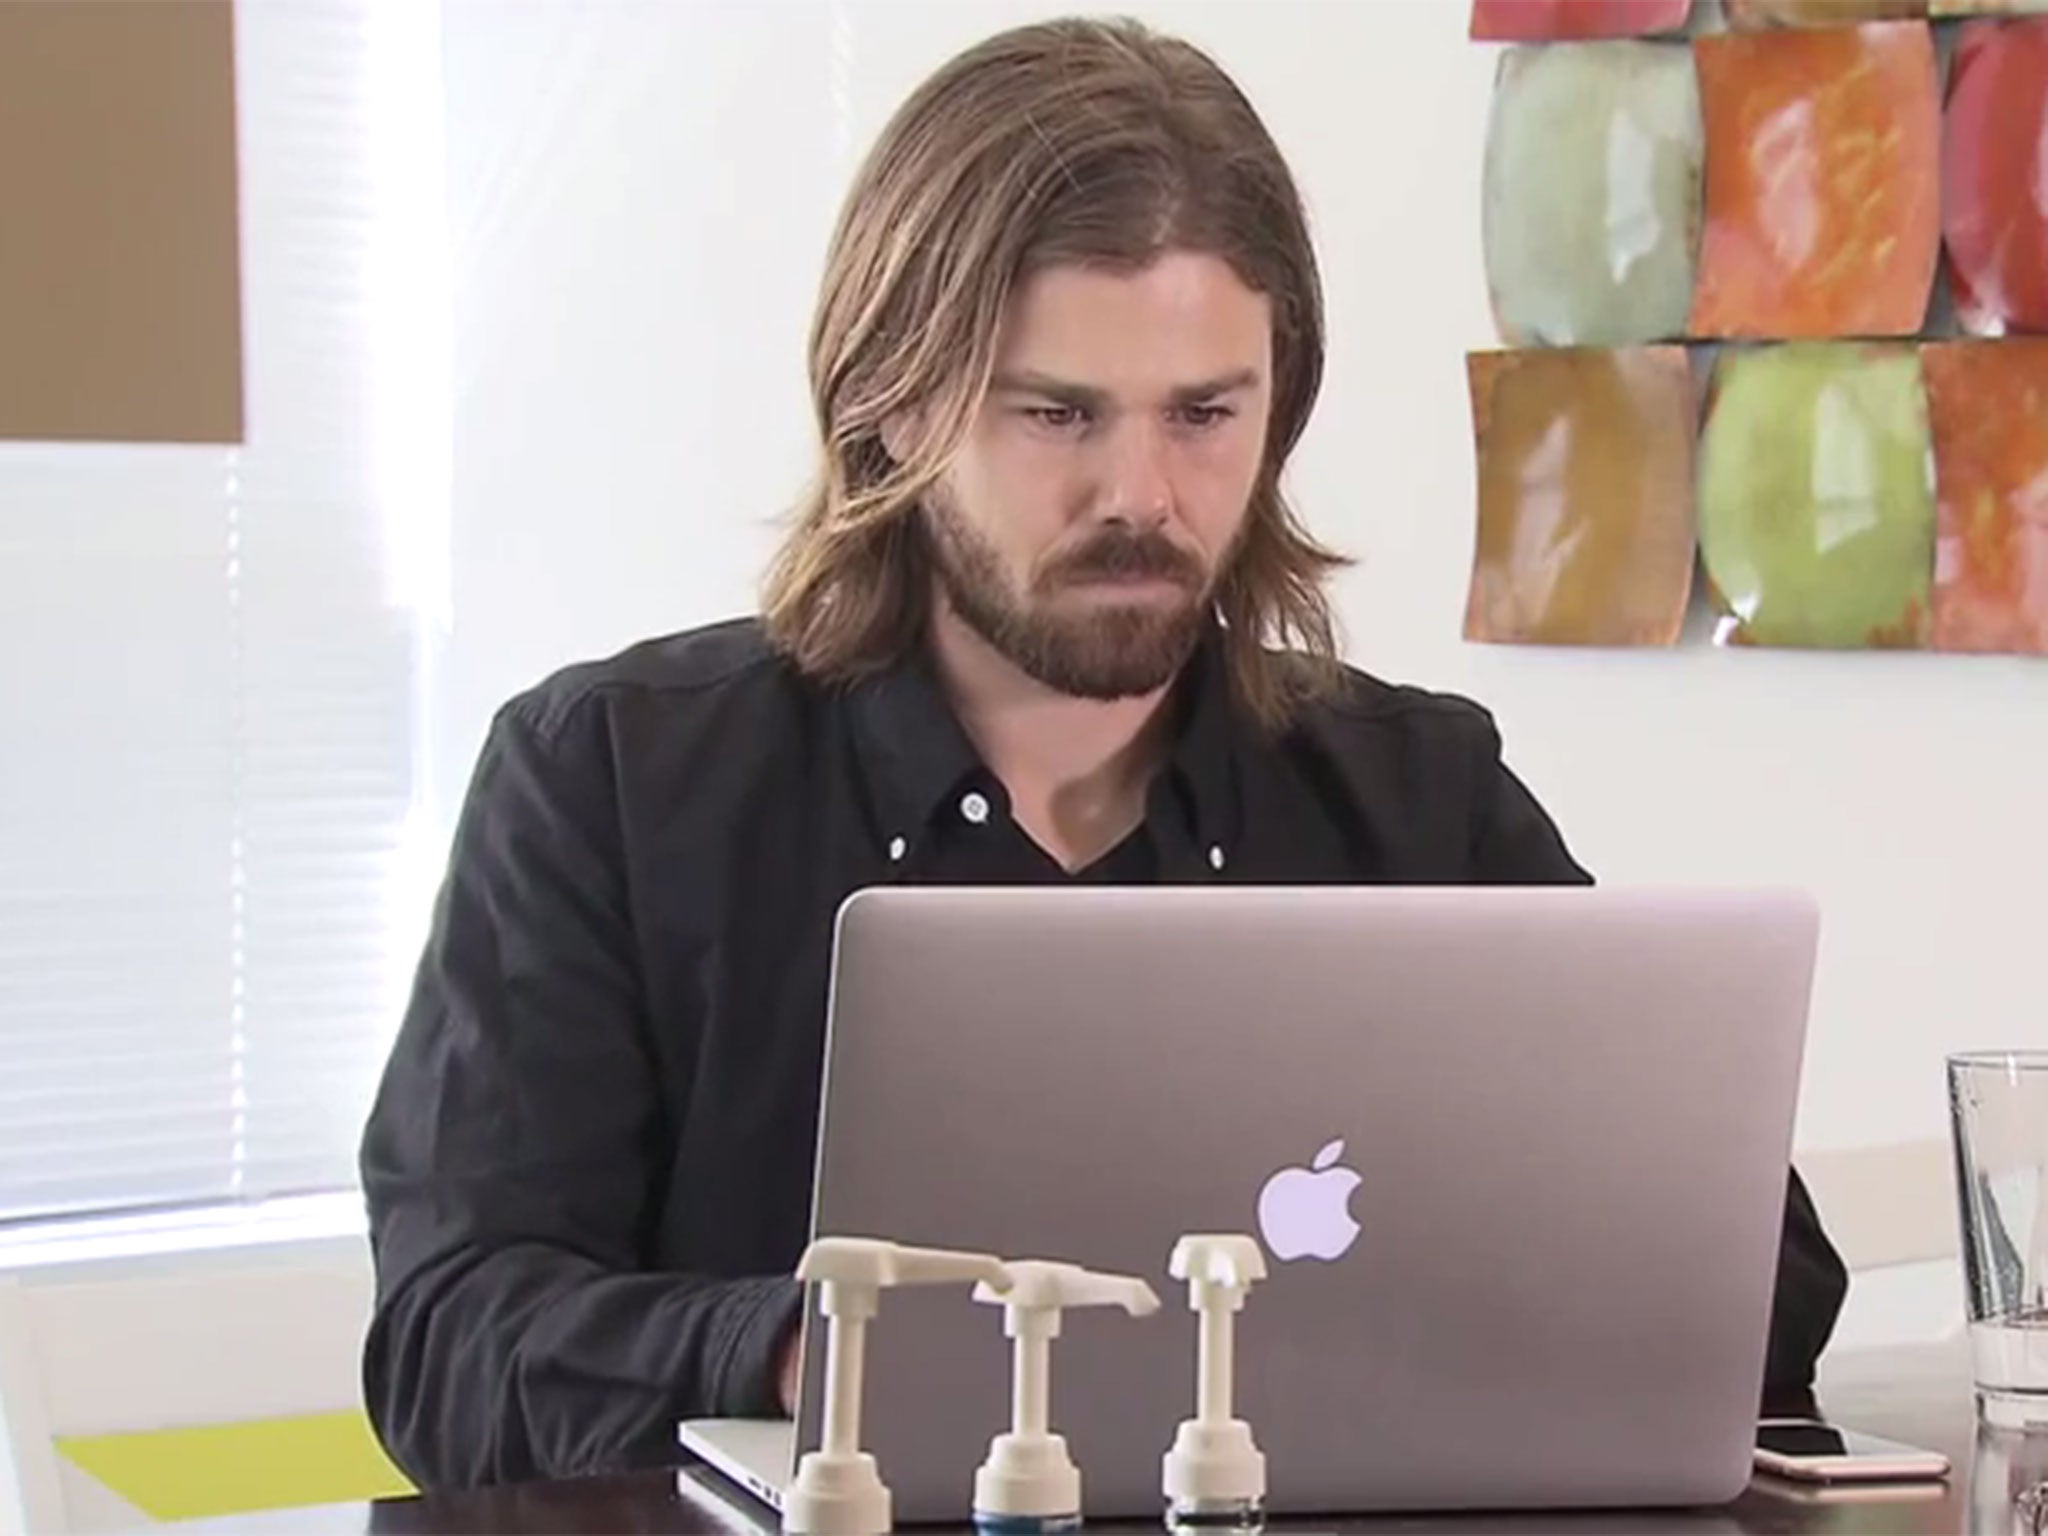 CEO Dan Price has pledged to pay all his workers at least $70,000